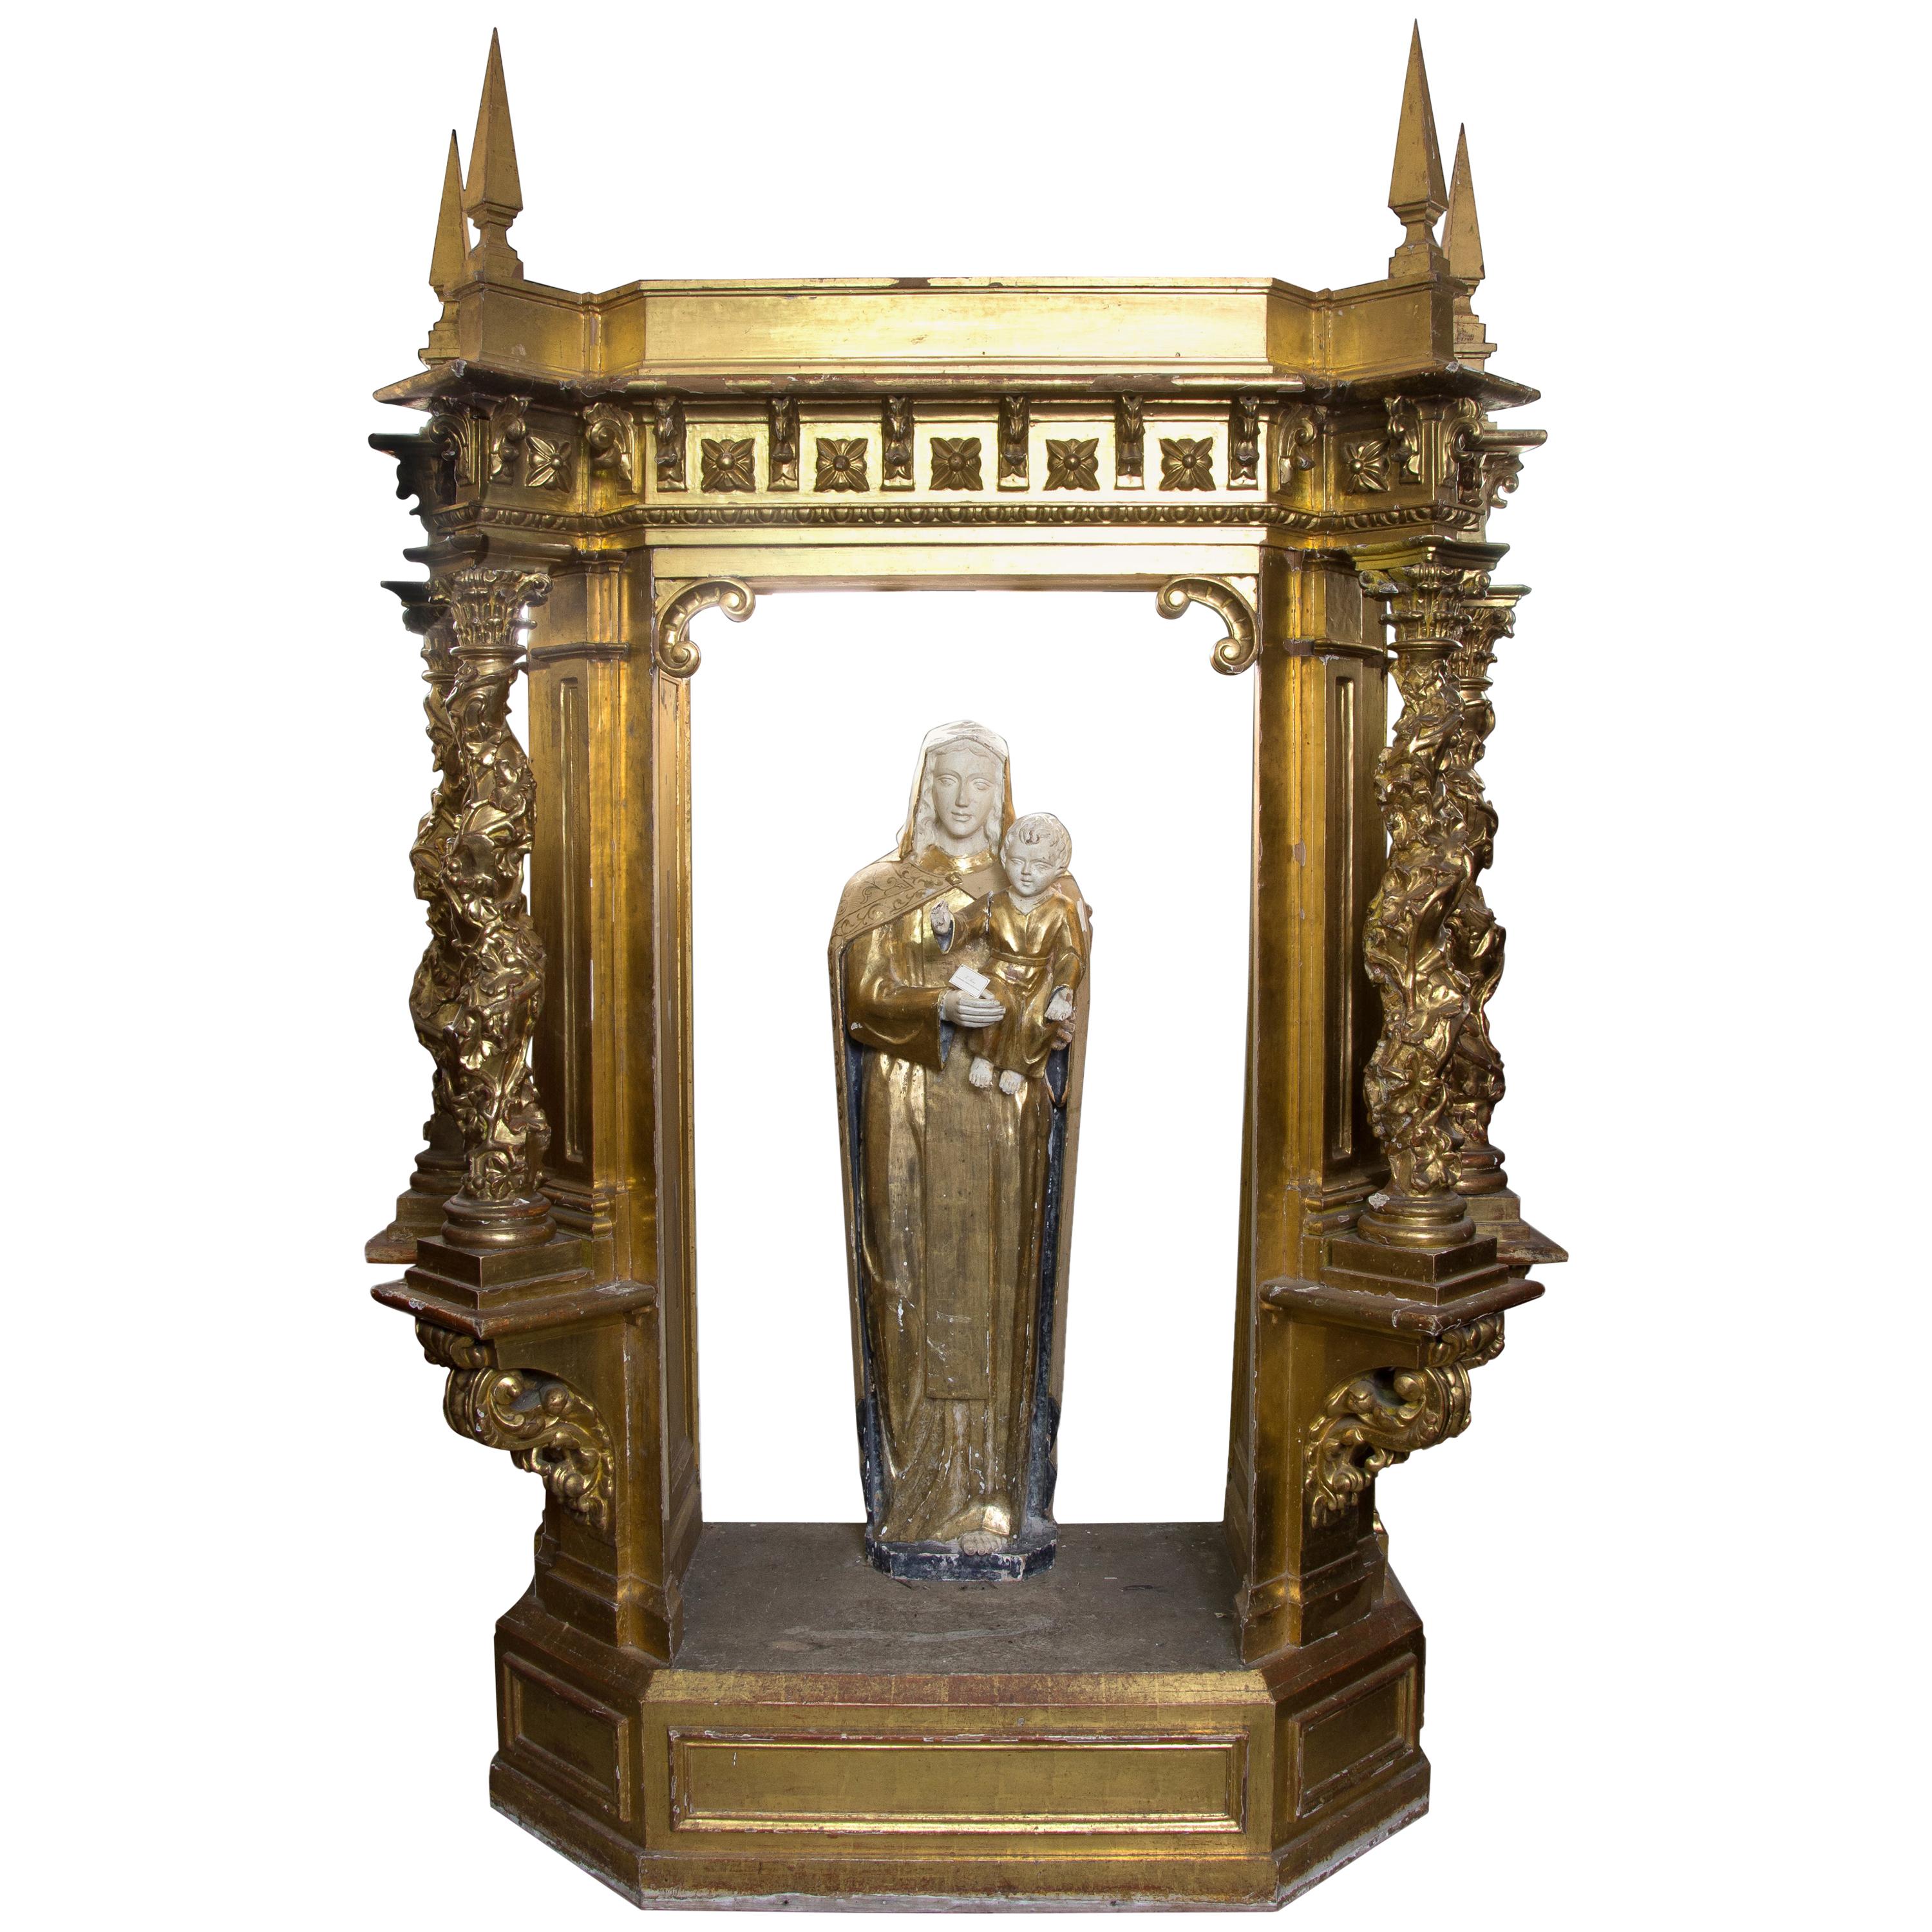 Reredos Fragment, Gilded Wood, circa Second Half of the 17th Century